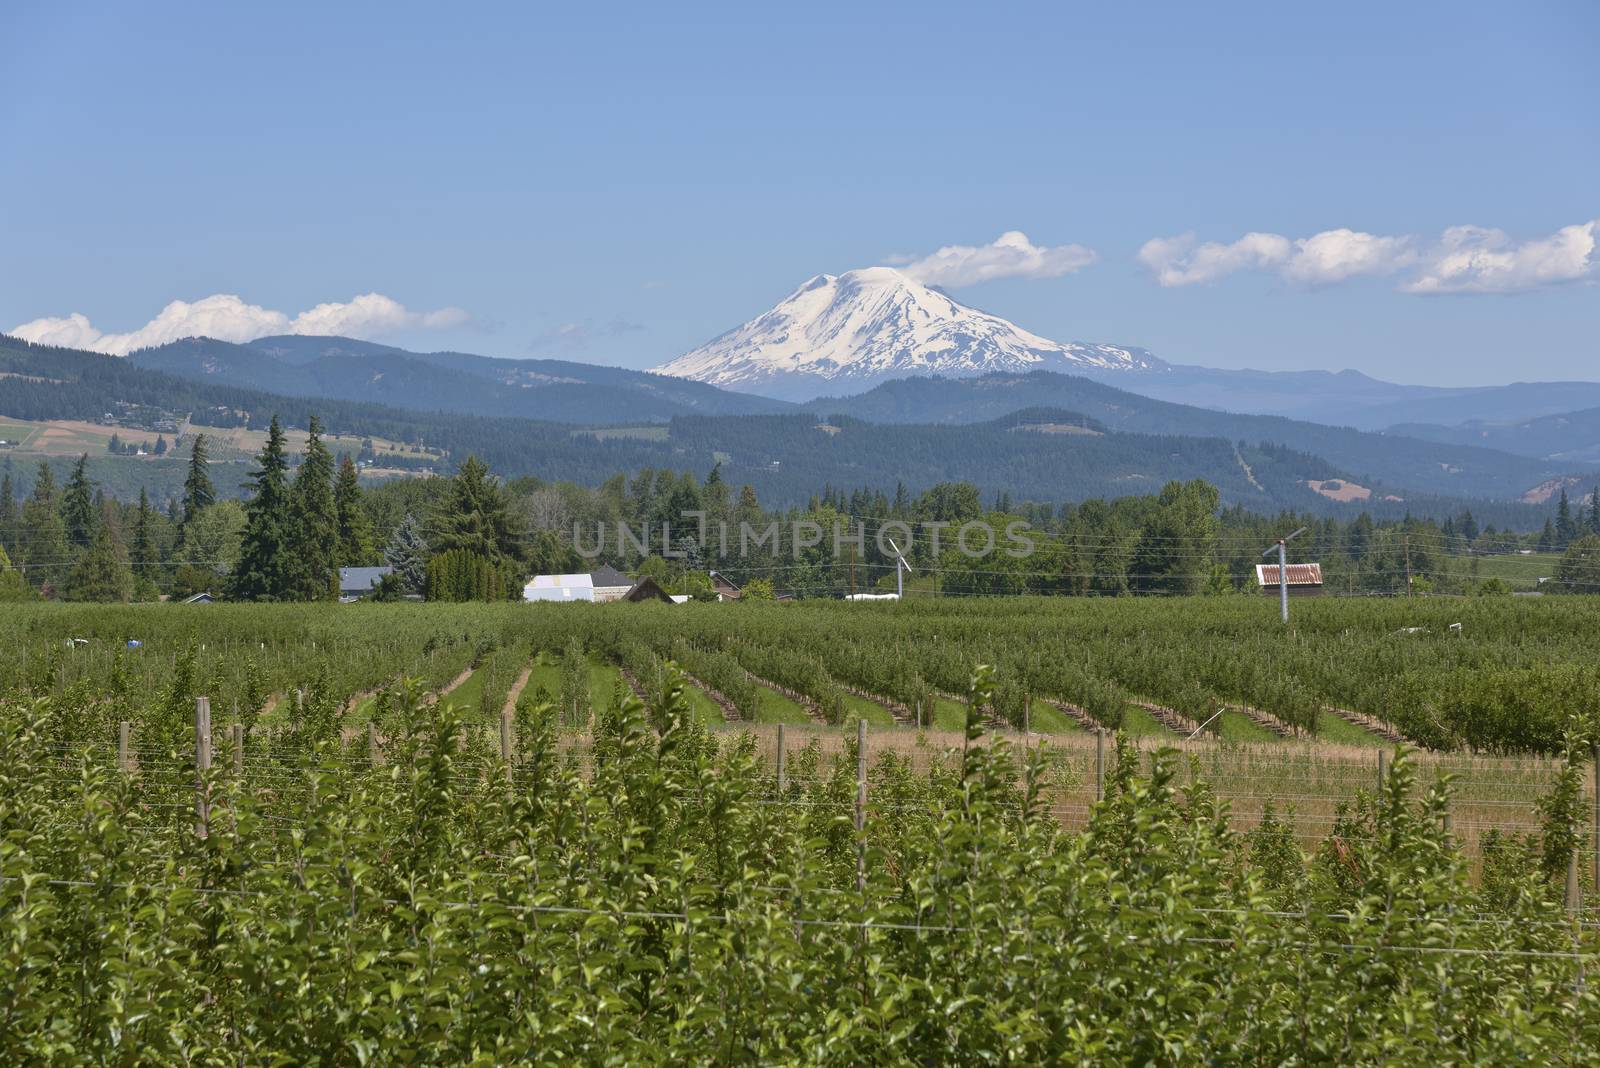 Mt. Adams and Hood River valley Oregon. by Rigucci